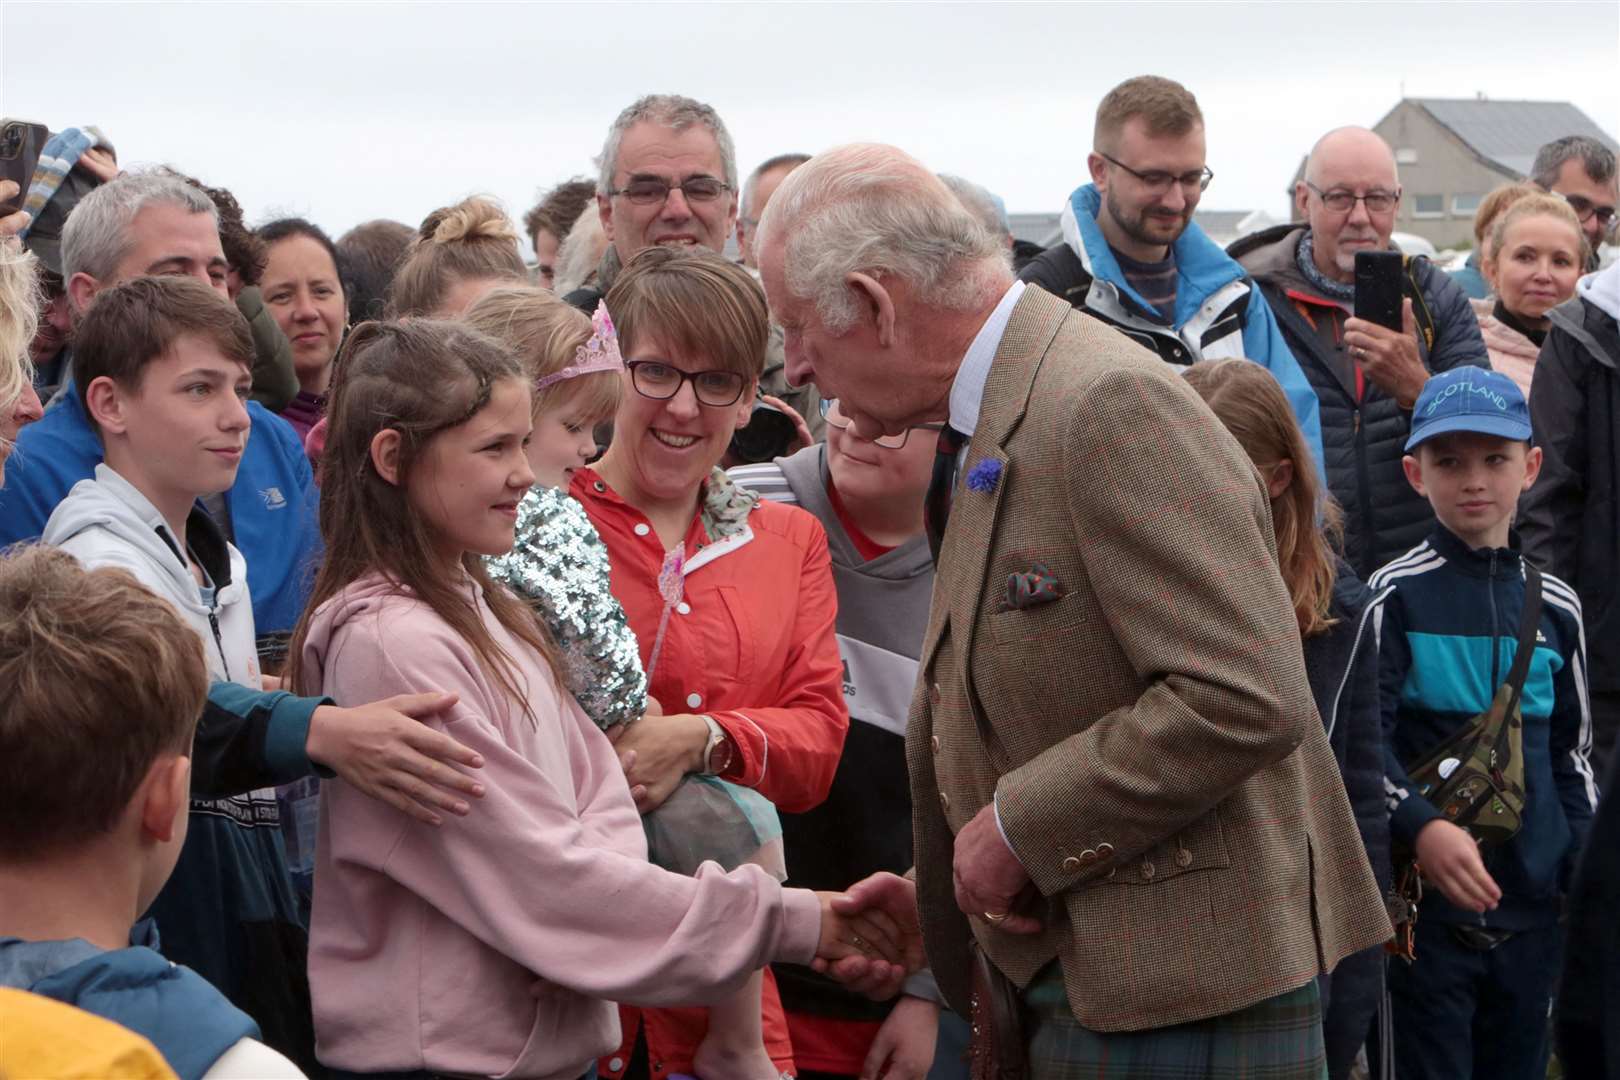 A crowd of onlookers gathered in the drizzle to see the royal visitor. Picture: PA